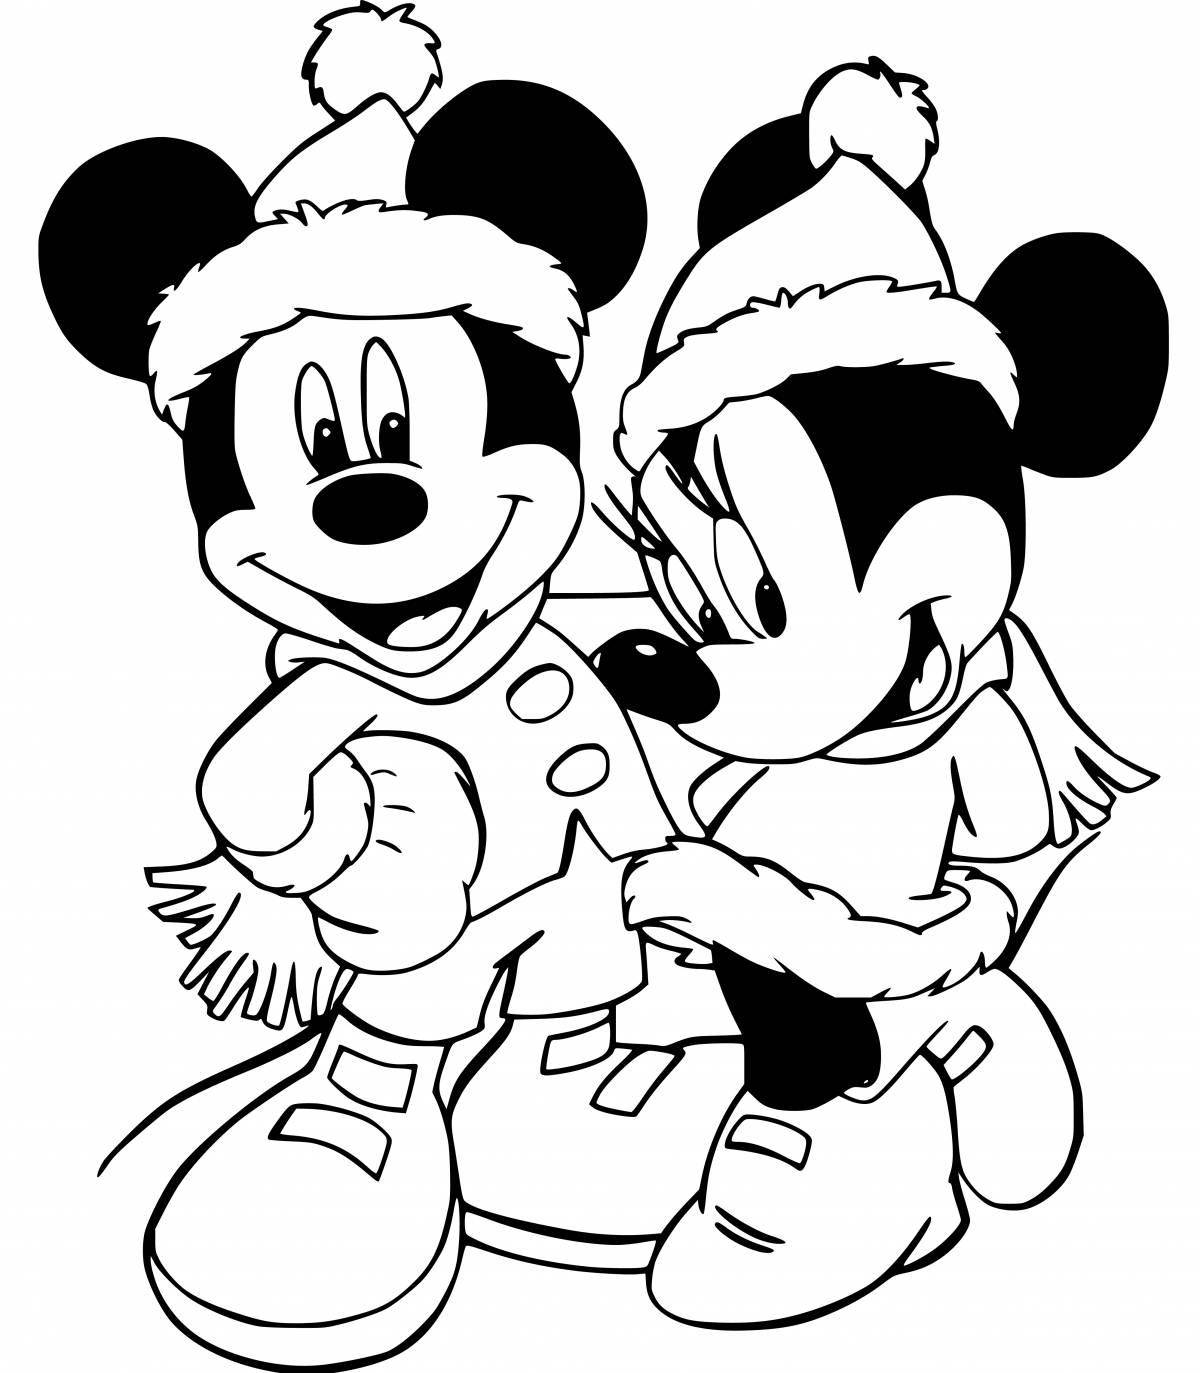 Mickey Mouse live Christmas coloring book